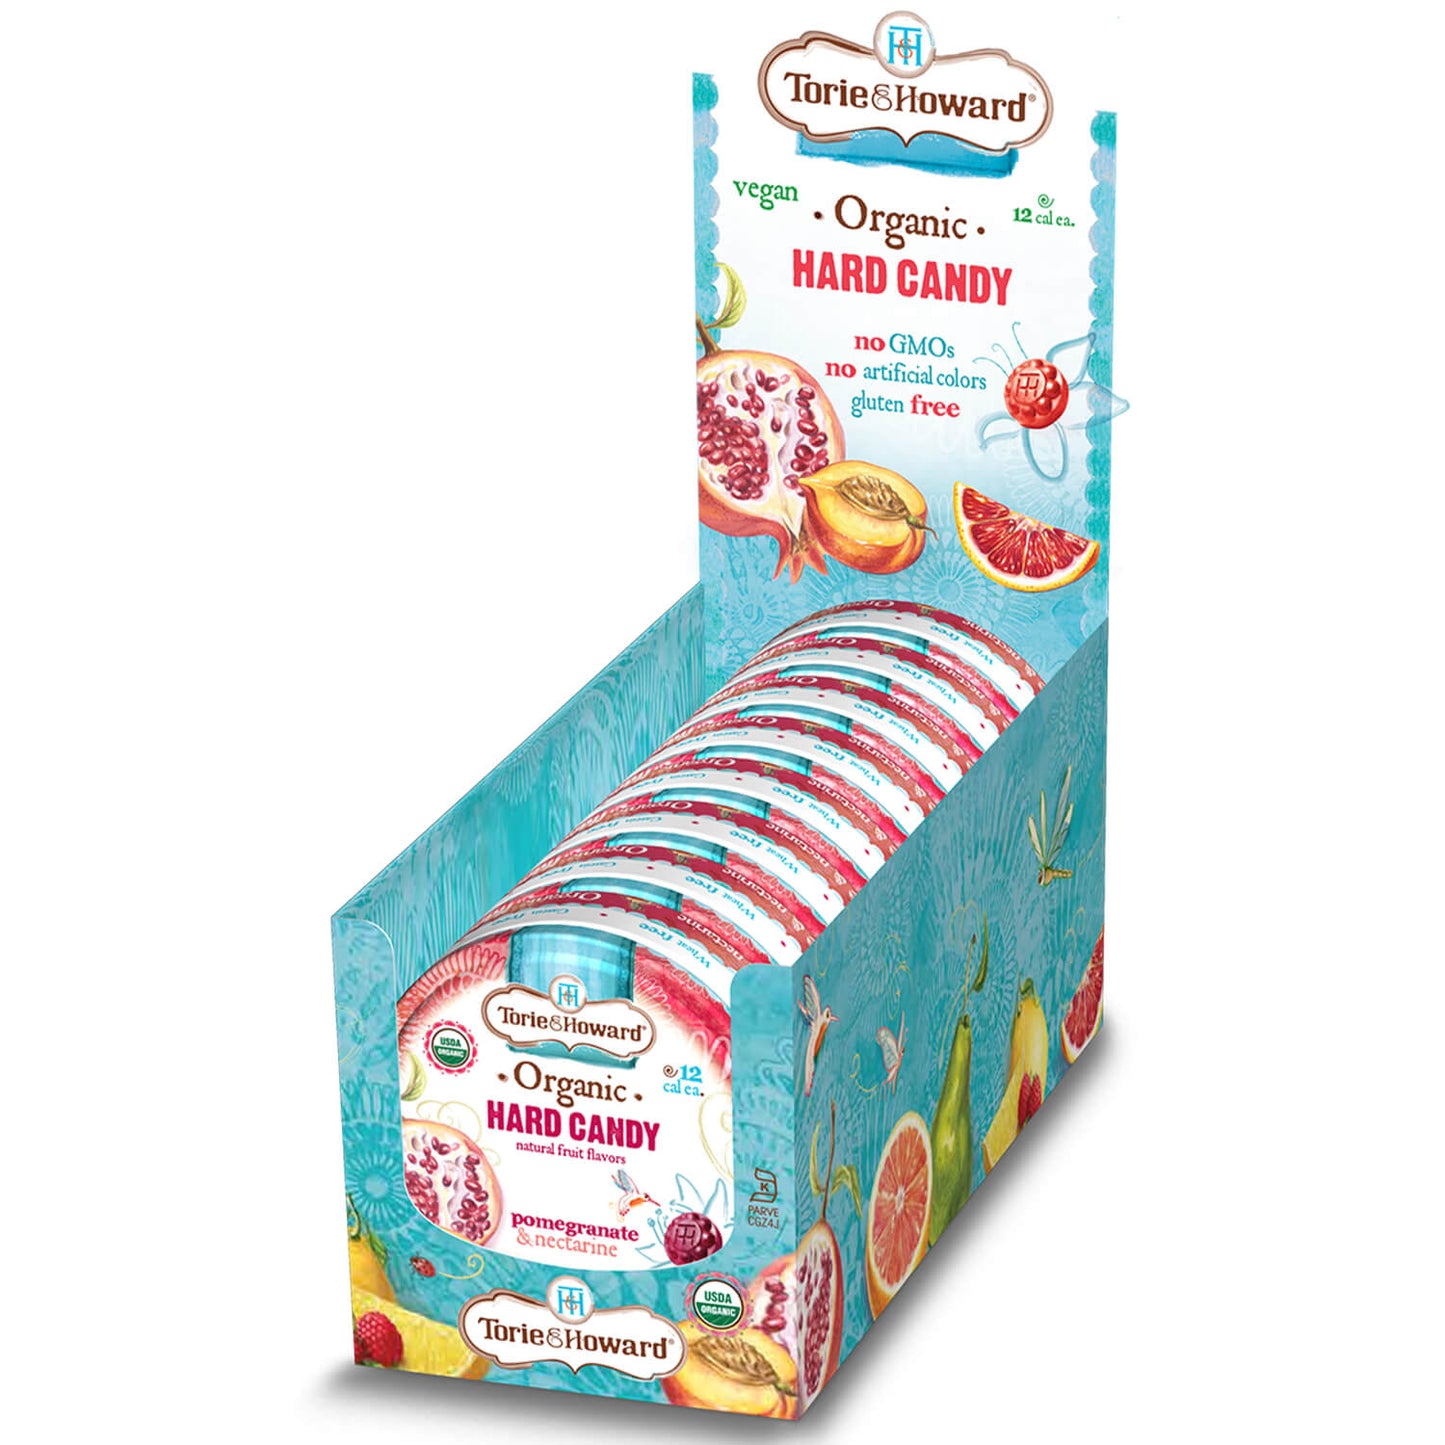 TORIE & HOWARD Pomegranate and Nectarine Organic Hard Candy 8-count Caddy